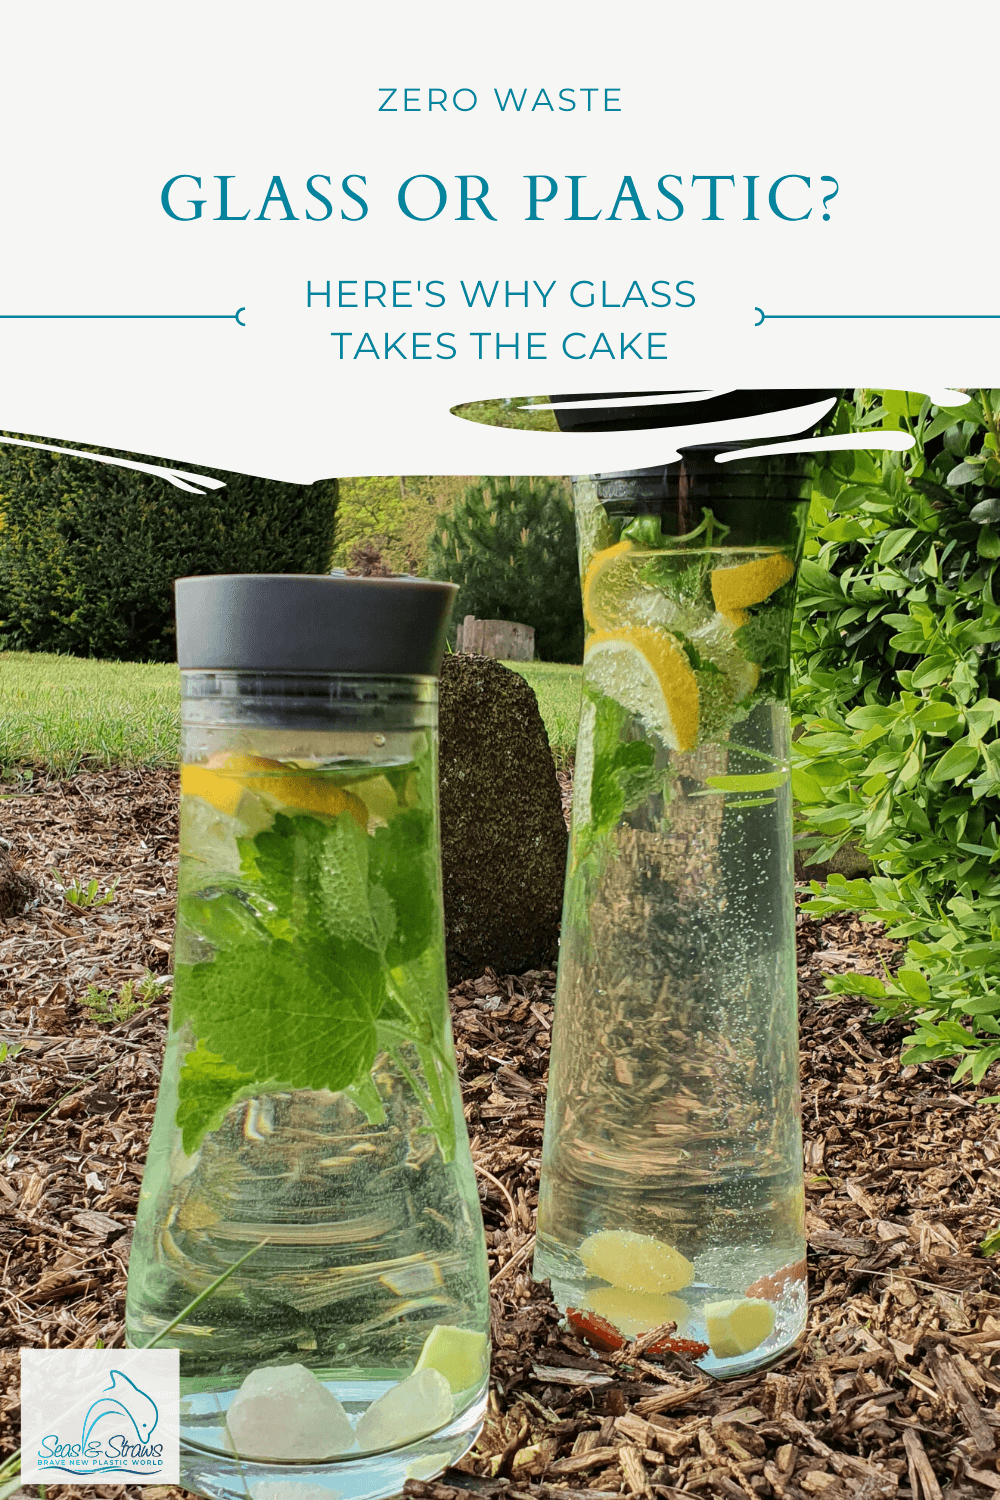 Glass or plastic? Here's why glass takes the cake. Seas & Straws